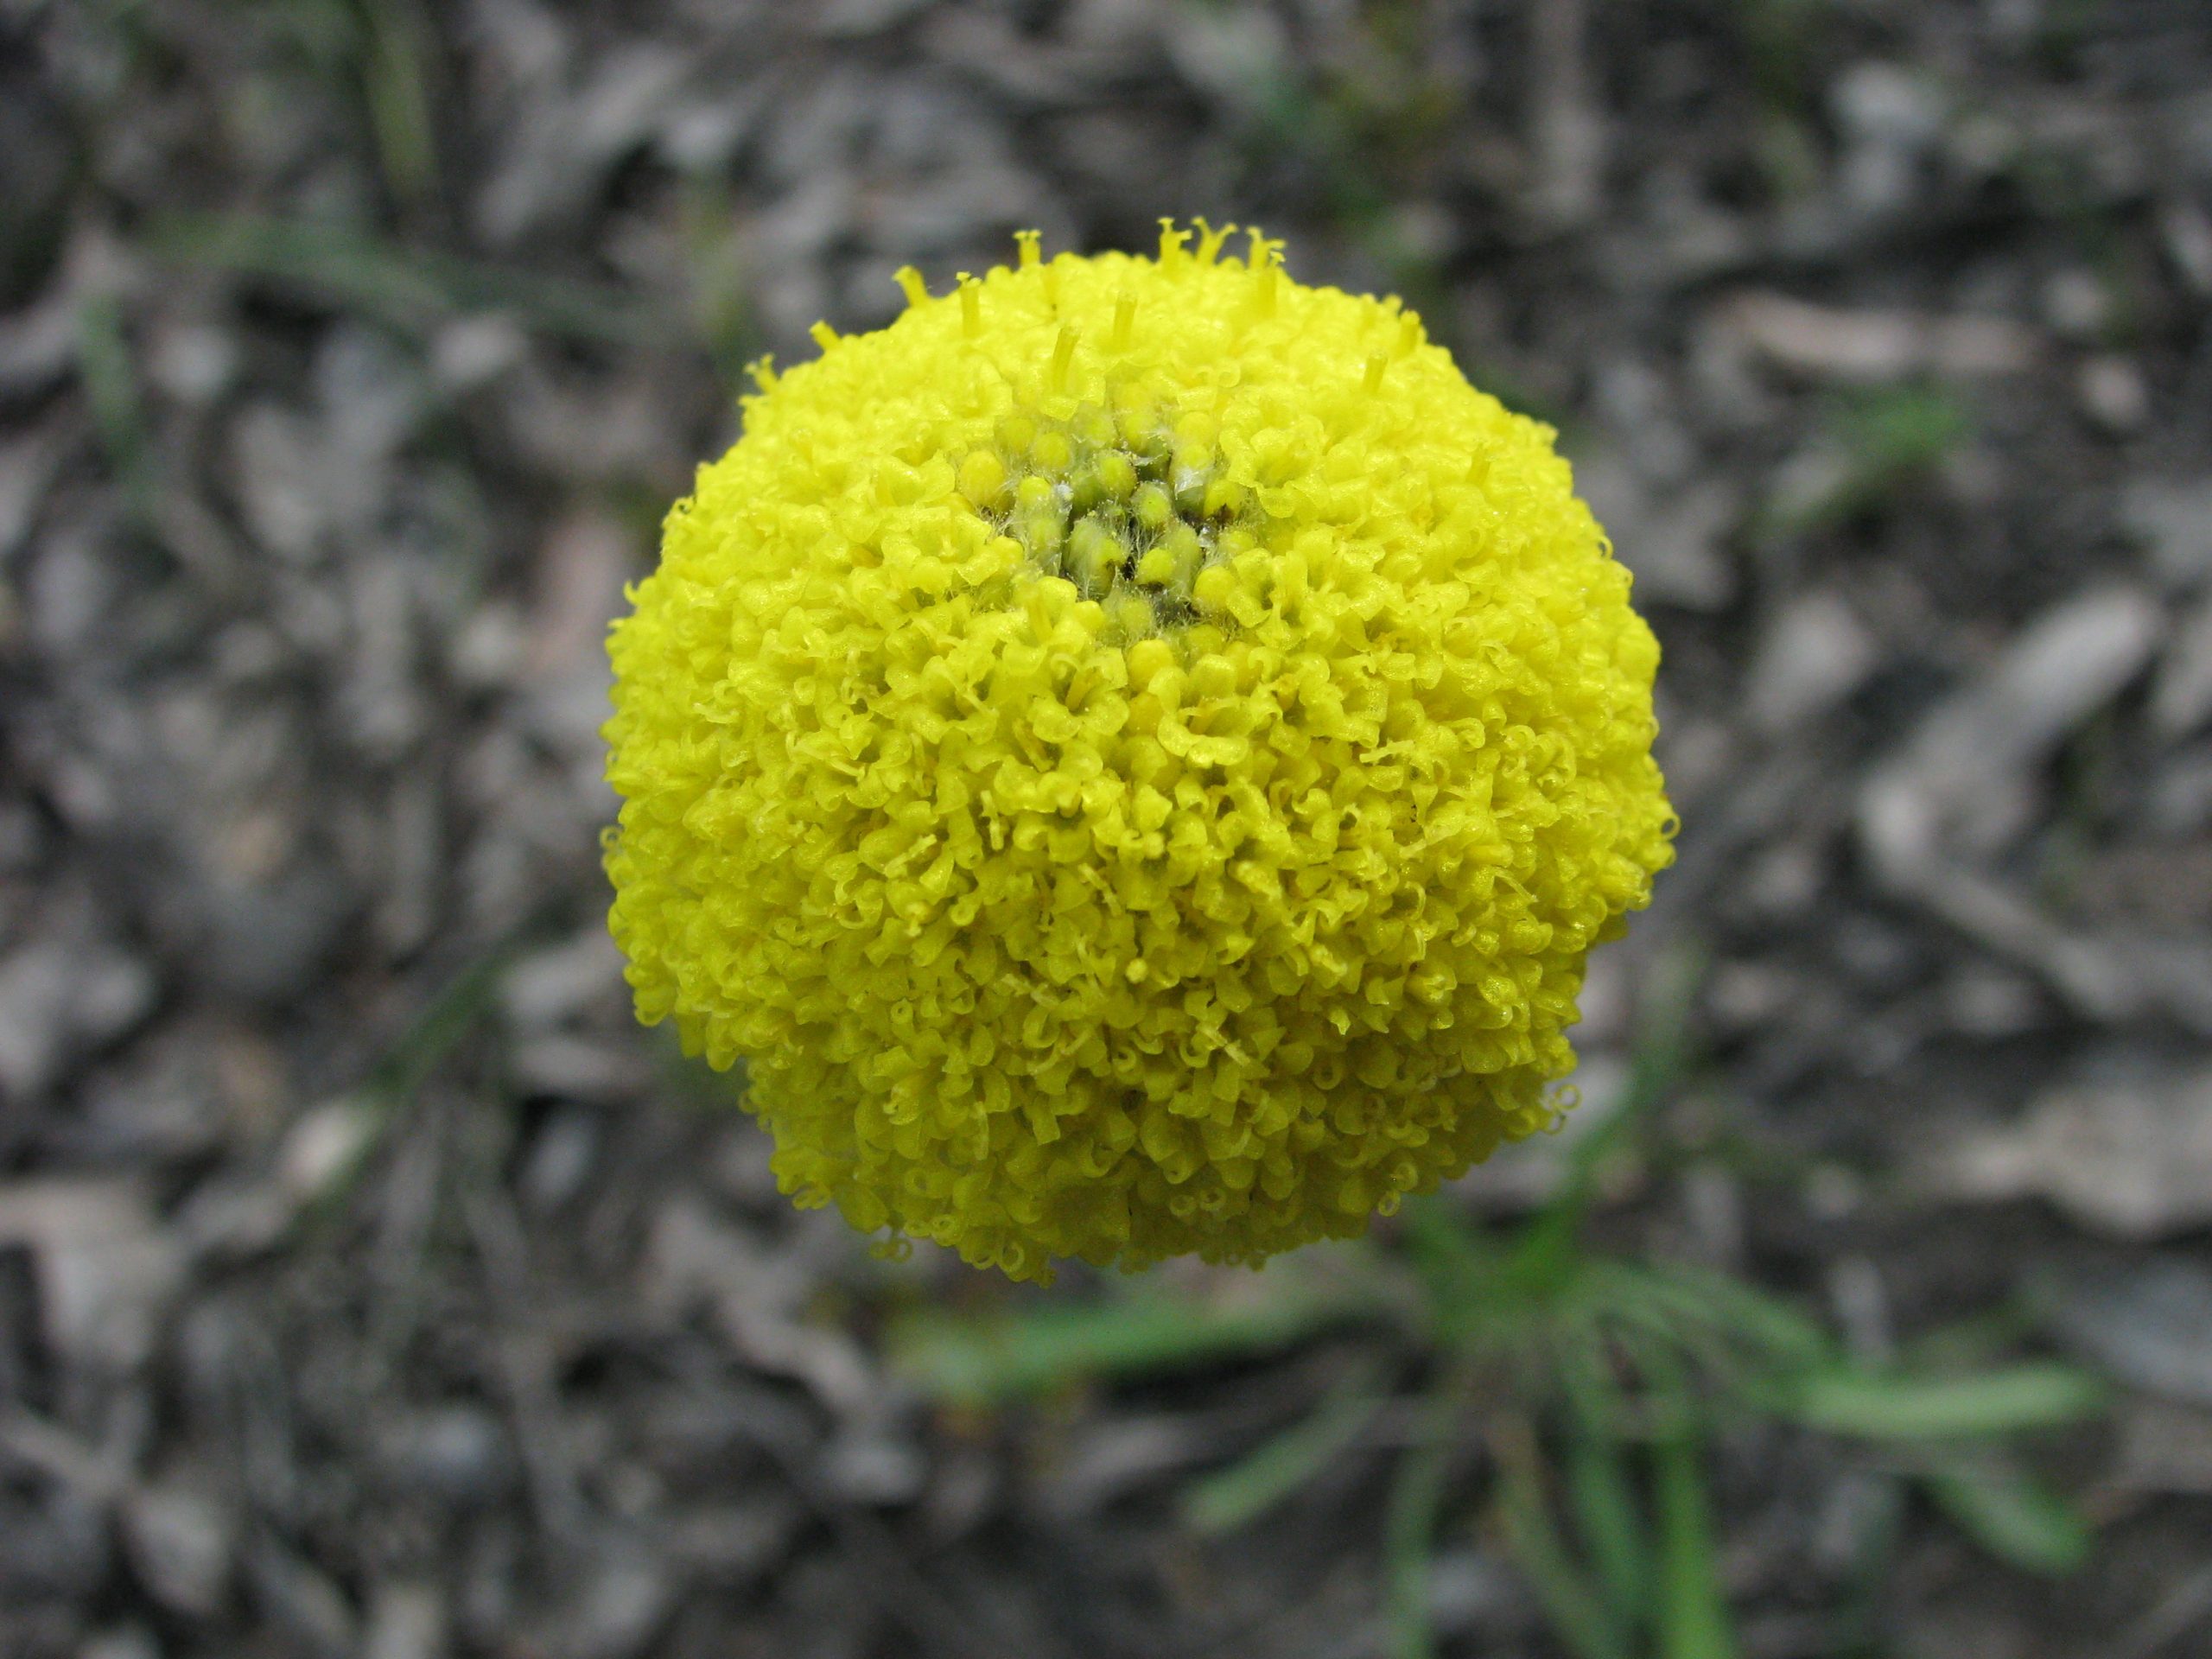 Common Billy Buttons